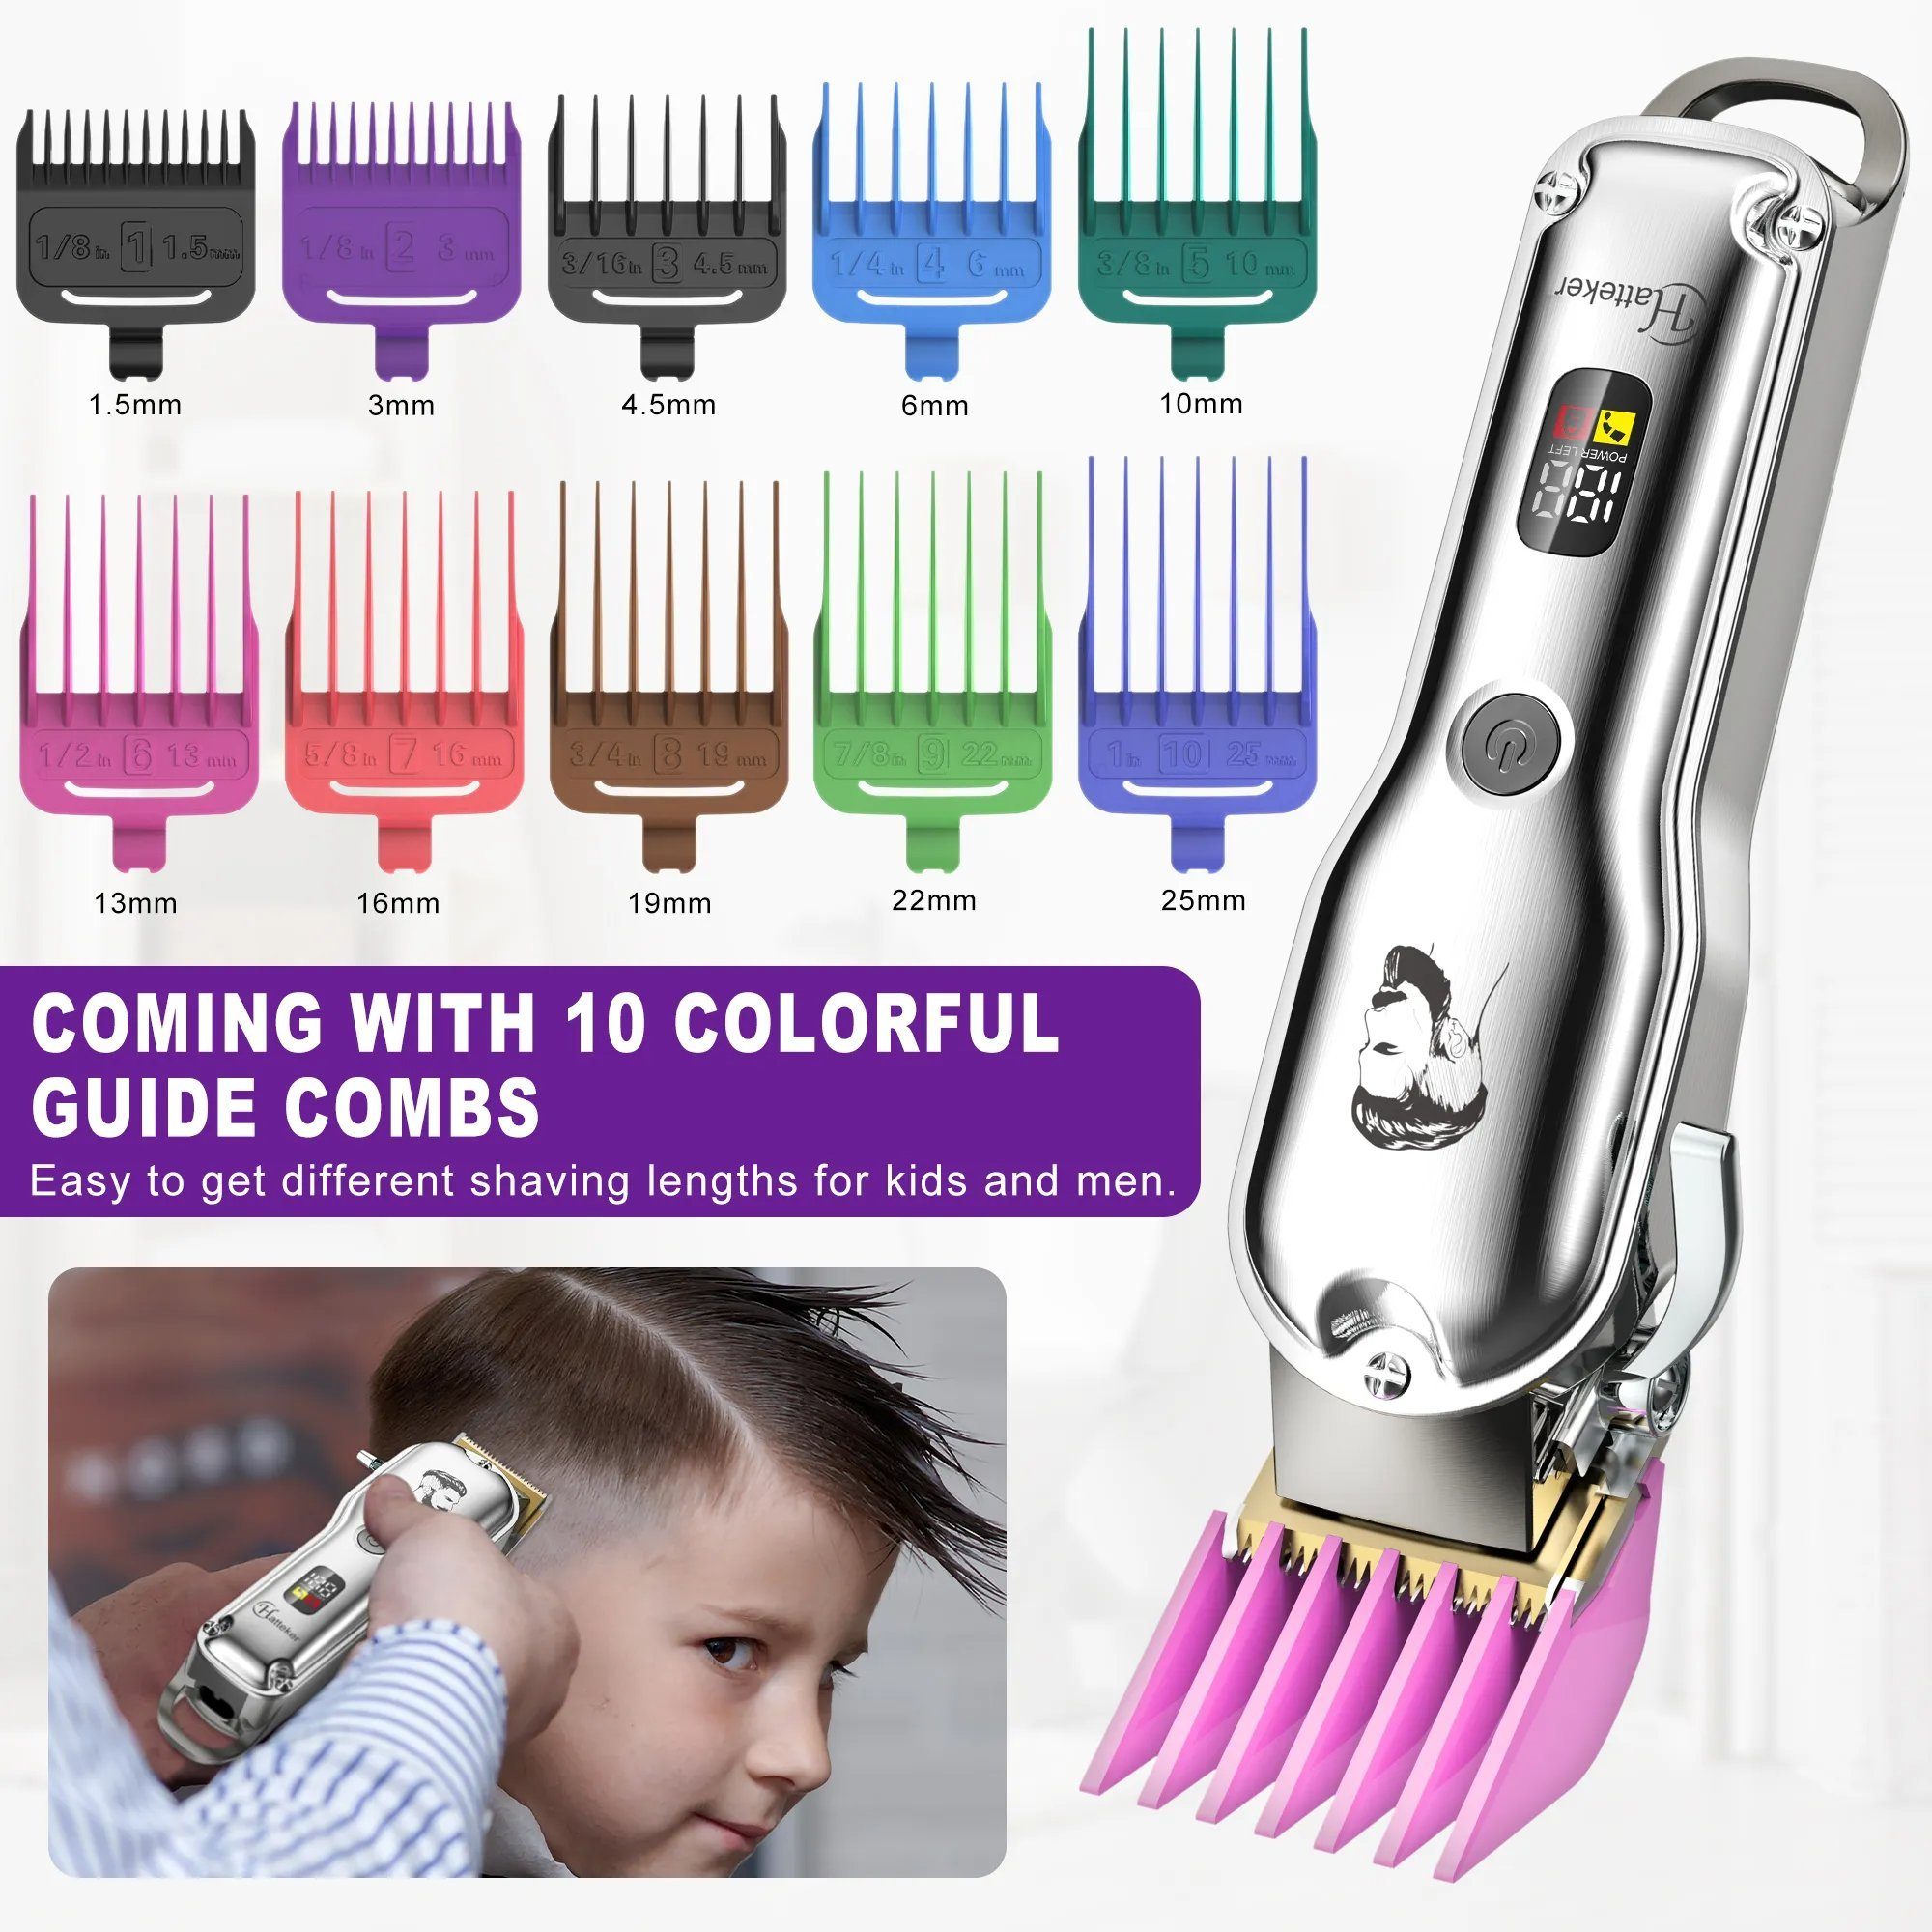 Combs Kit Rechargeable, Beauty-Trimmer Grooming 2000 waschbar Professional Barbers Clippers, mAh, Hair Colorful HATTEKER Vollständig